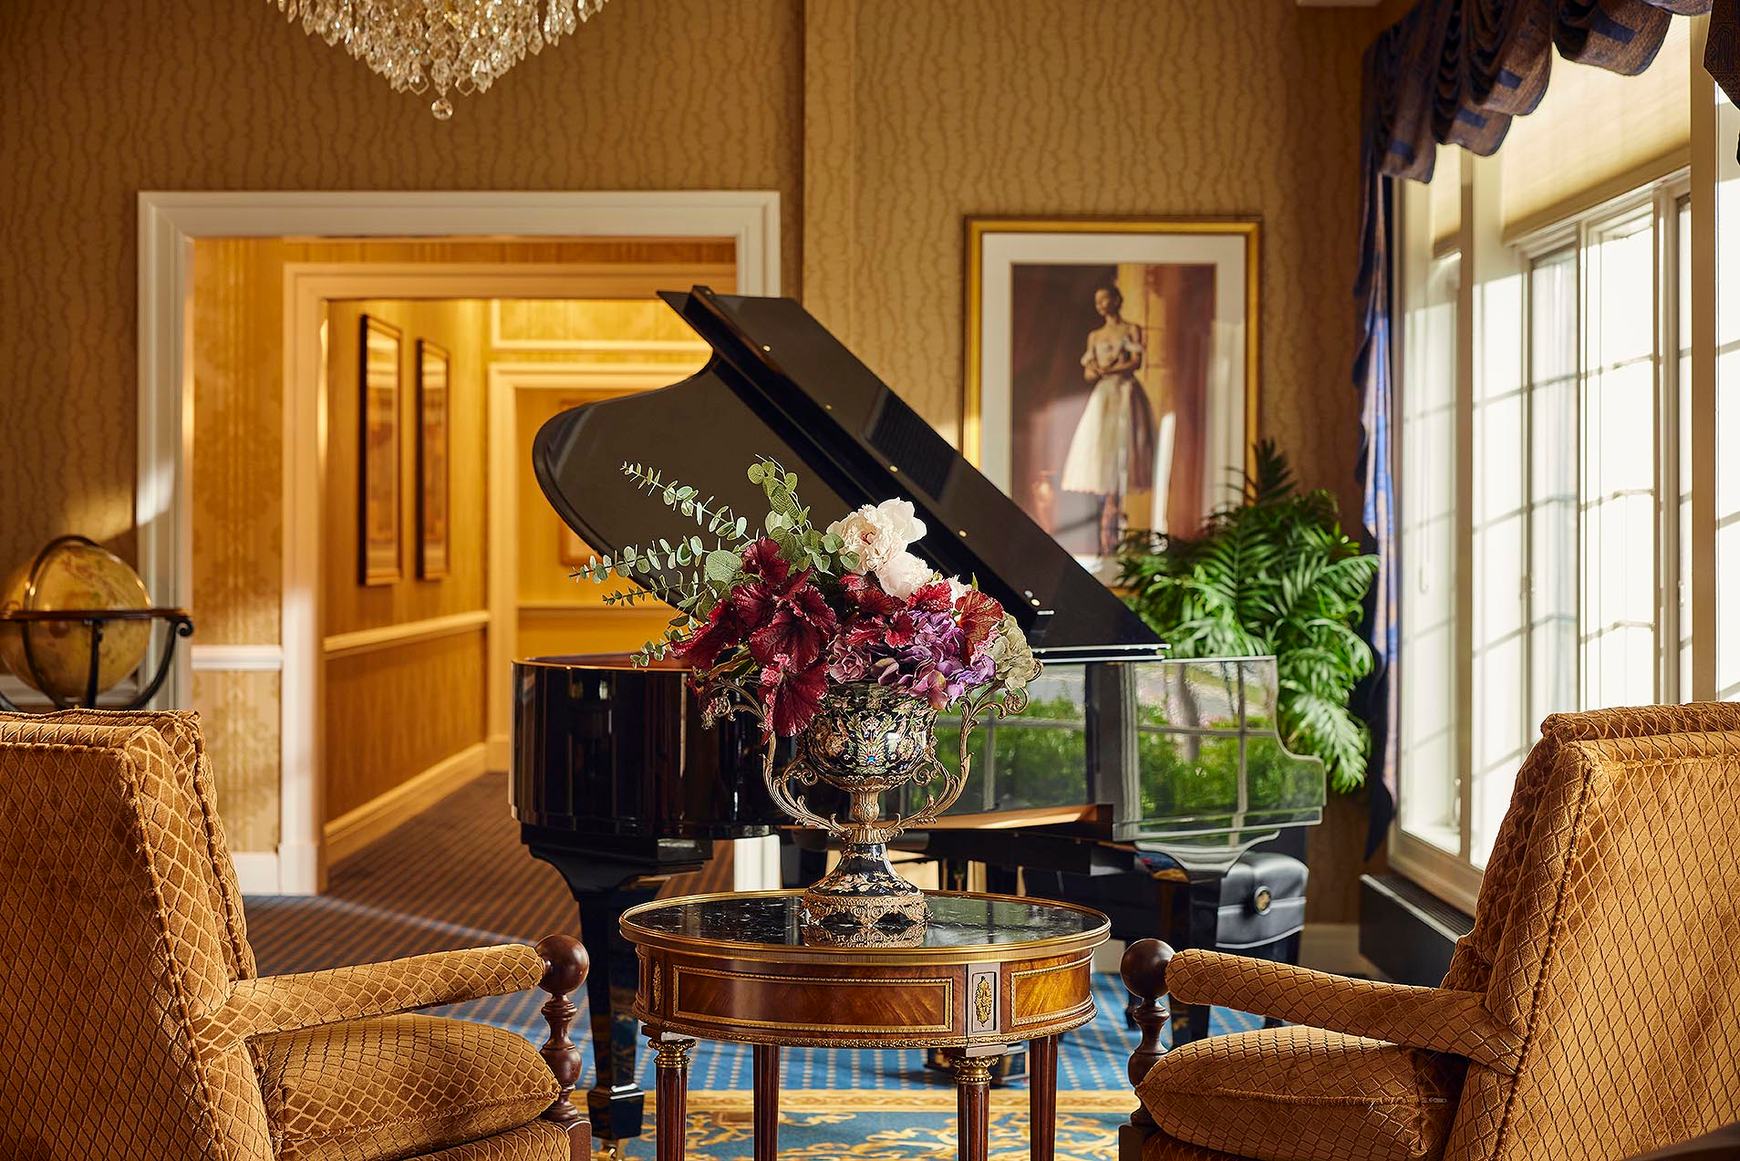 A baby grand piano in the grand lobby